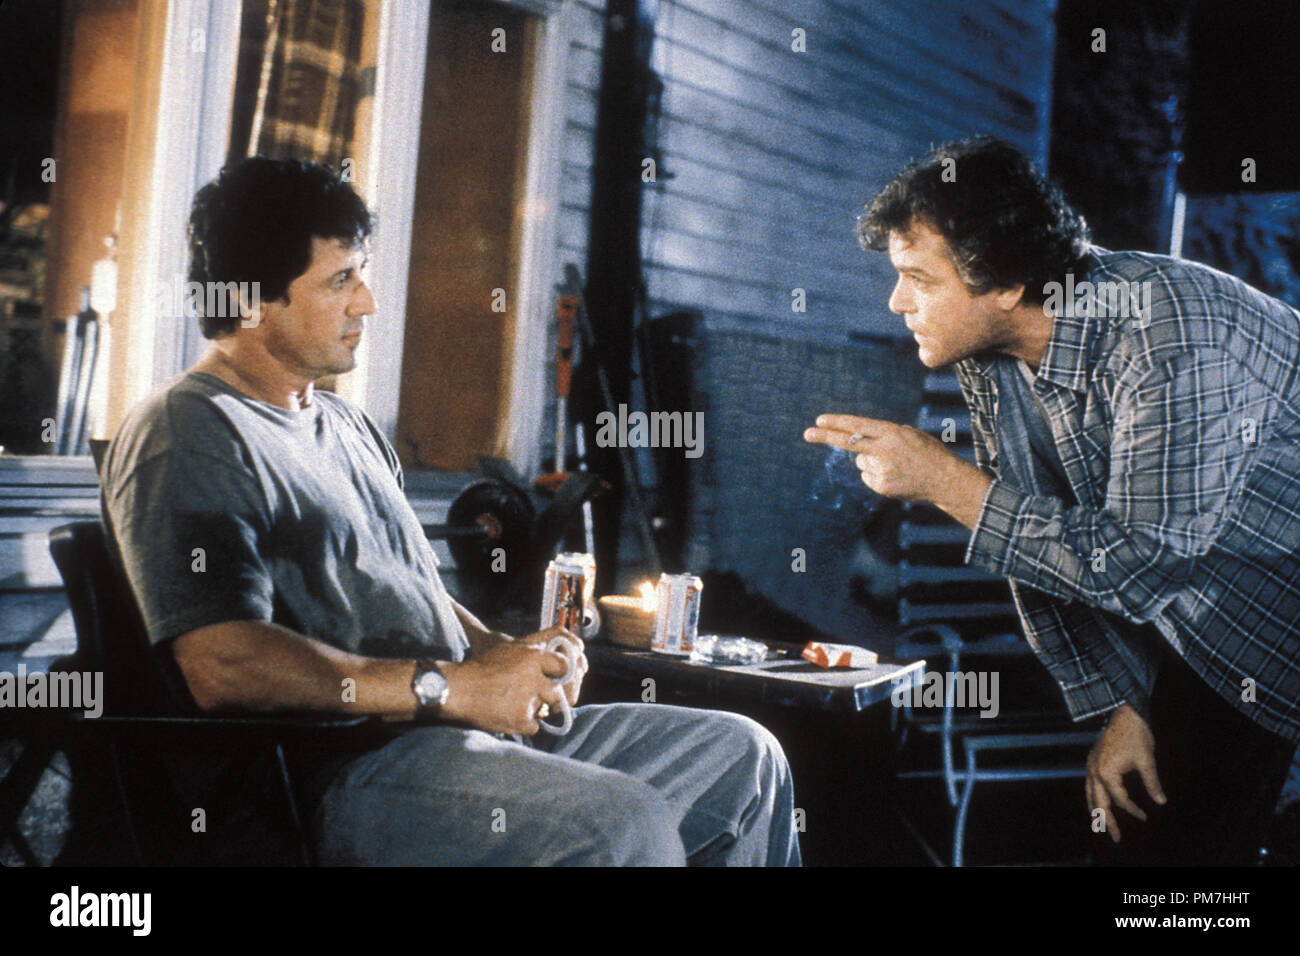 Film Still from 'Cop Land' Sylvester Stallone, Ray Liotta © 1997 Miramax Films Photo Credit: Sam Emerson   File Reference # 31013374THA  For Editorial Use Only - All Rights Reserved Stock Photo